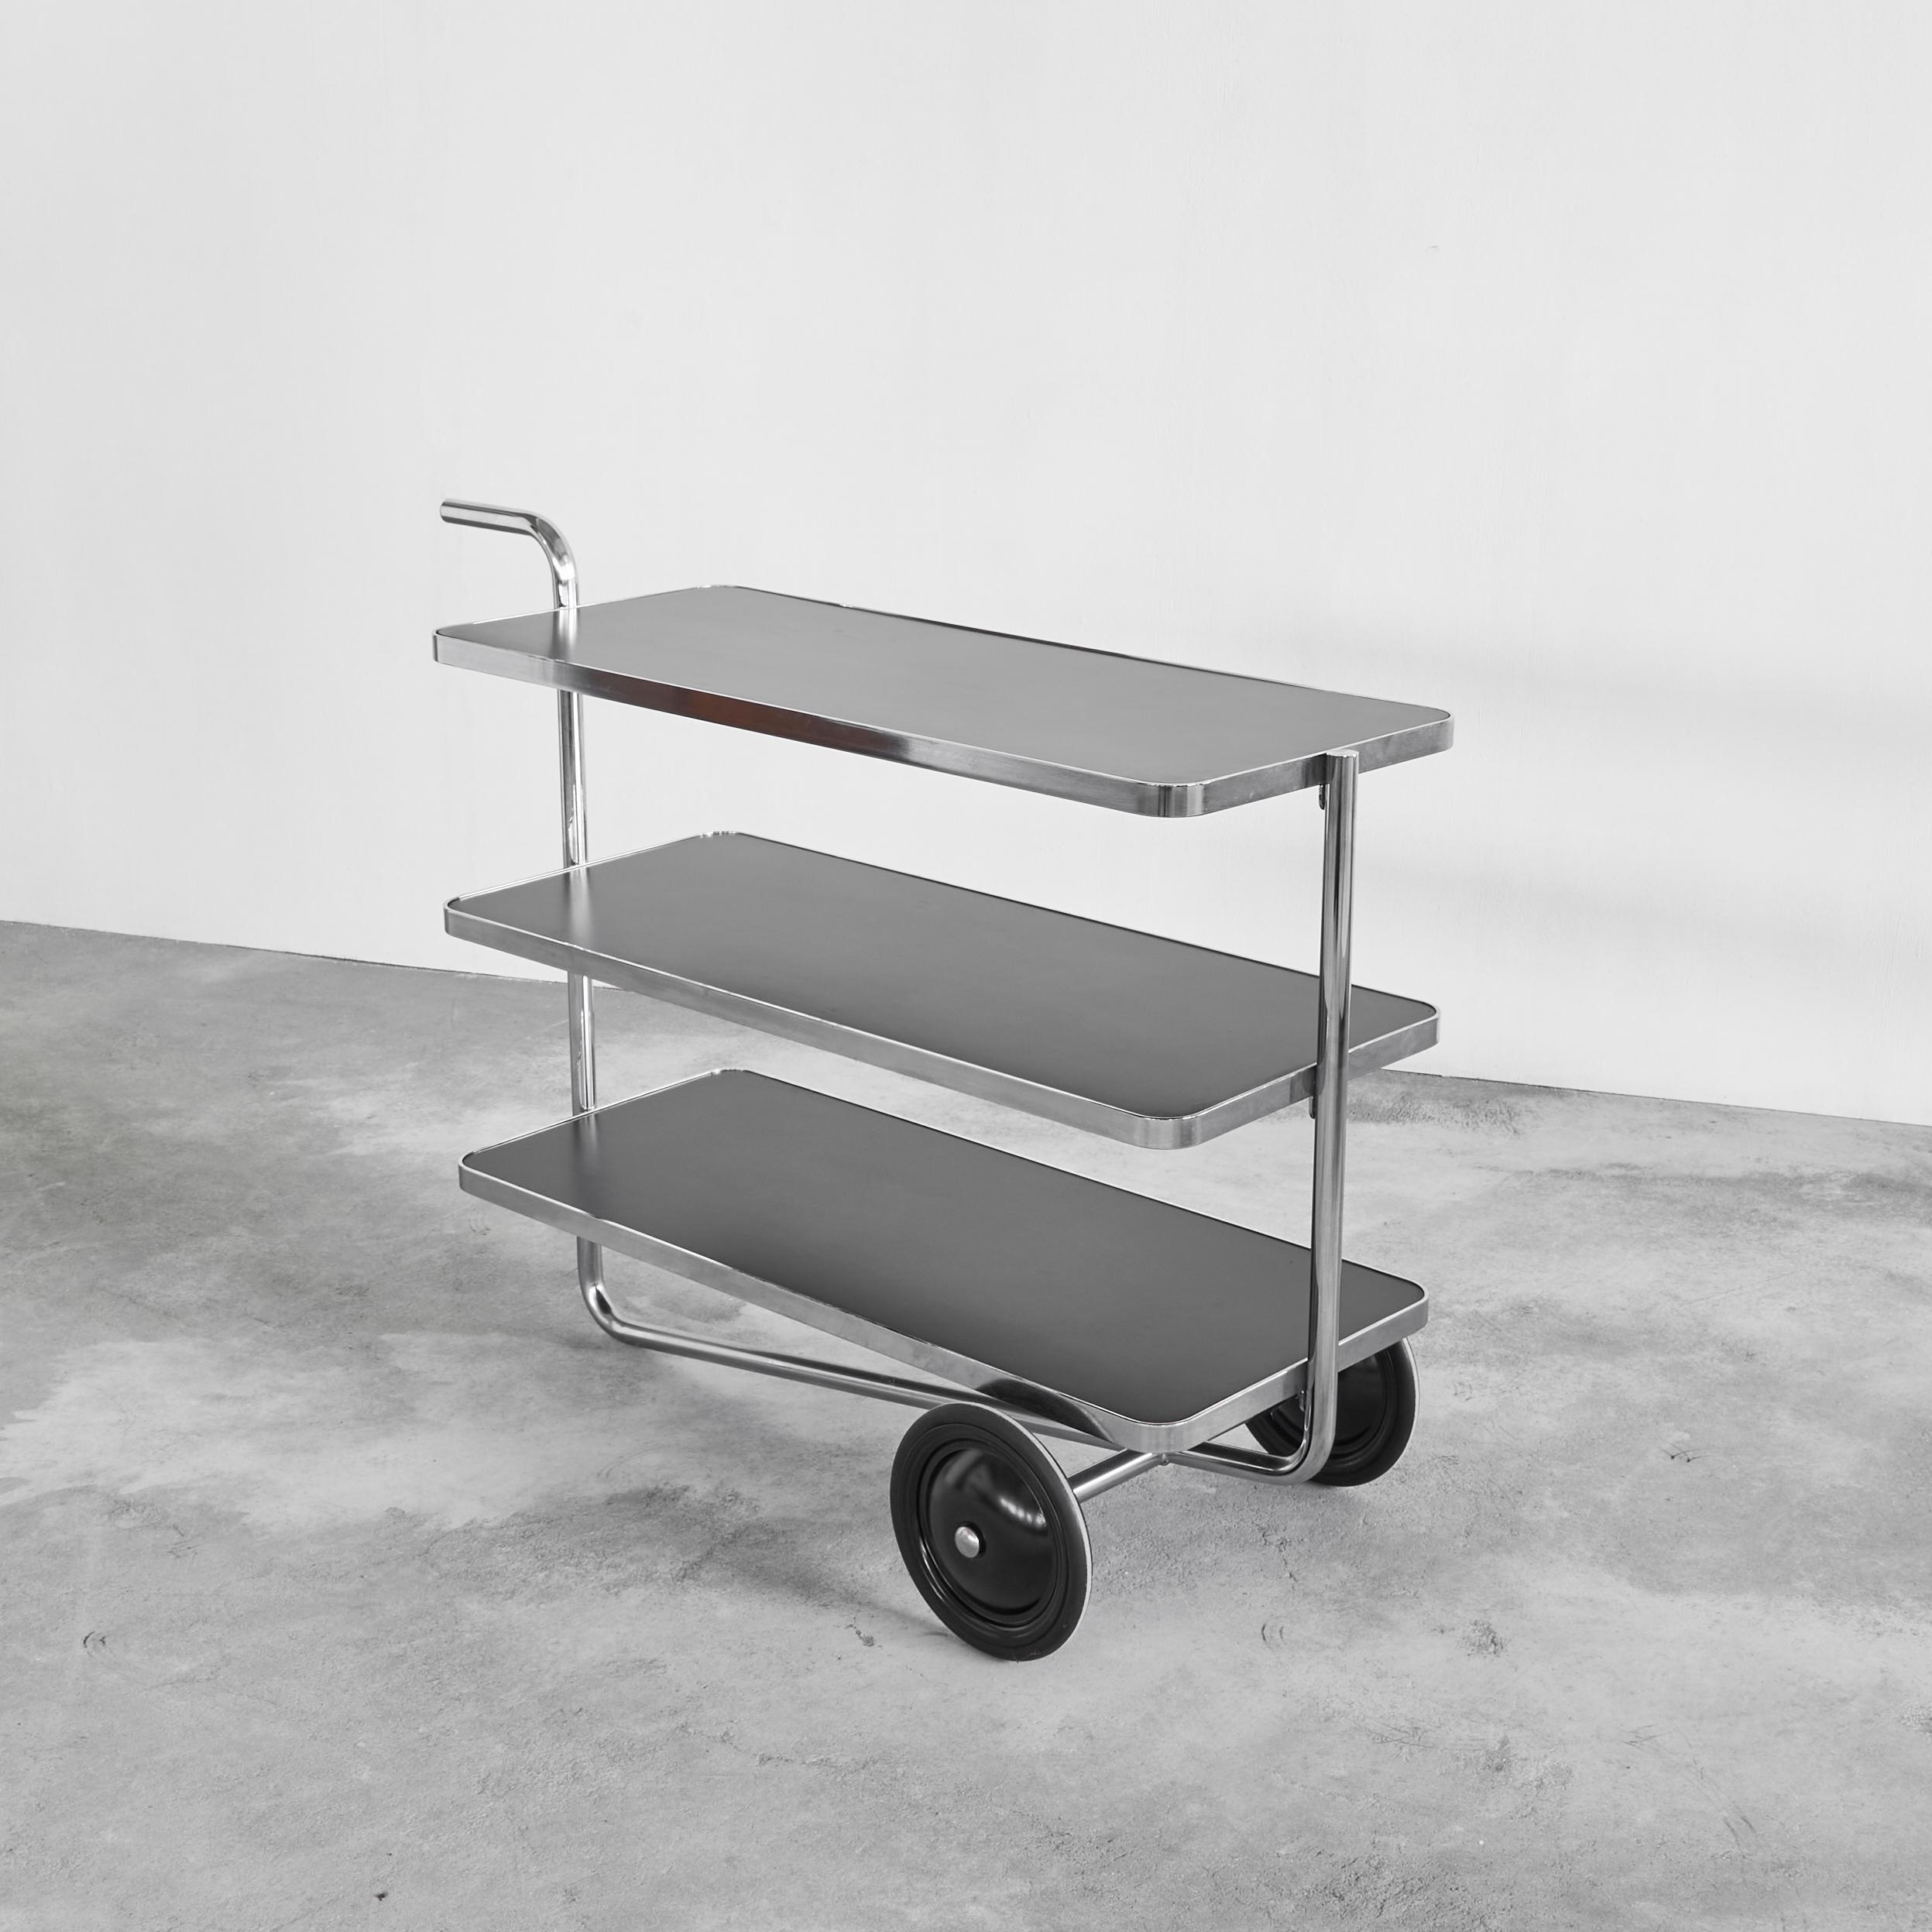 Thonet Bauhaus Style Tubular Trolley or Bar Cart 1980s.

Wonderful and rare Bauhaus style trolley or bar cart in the style of Thonet. Very well designed with a timeless and modern appearance due to the combination of black laminate and the chromed